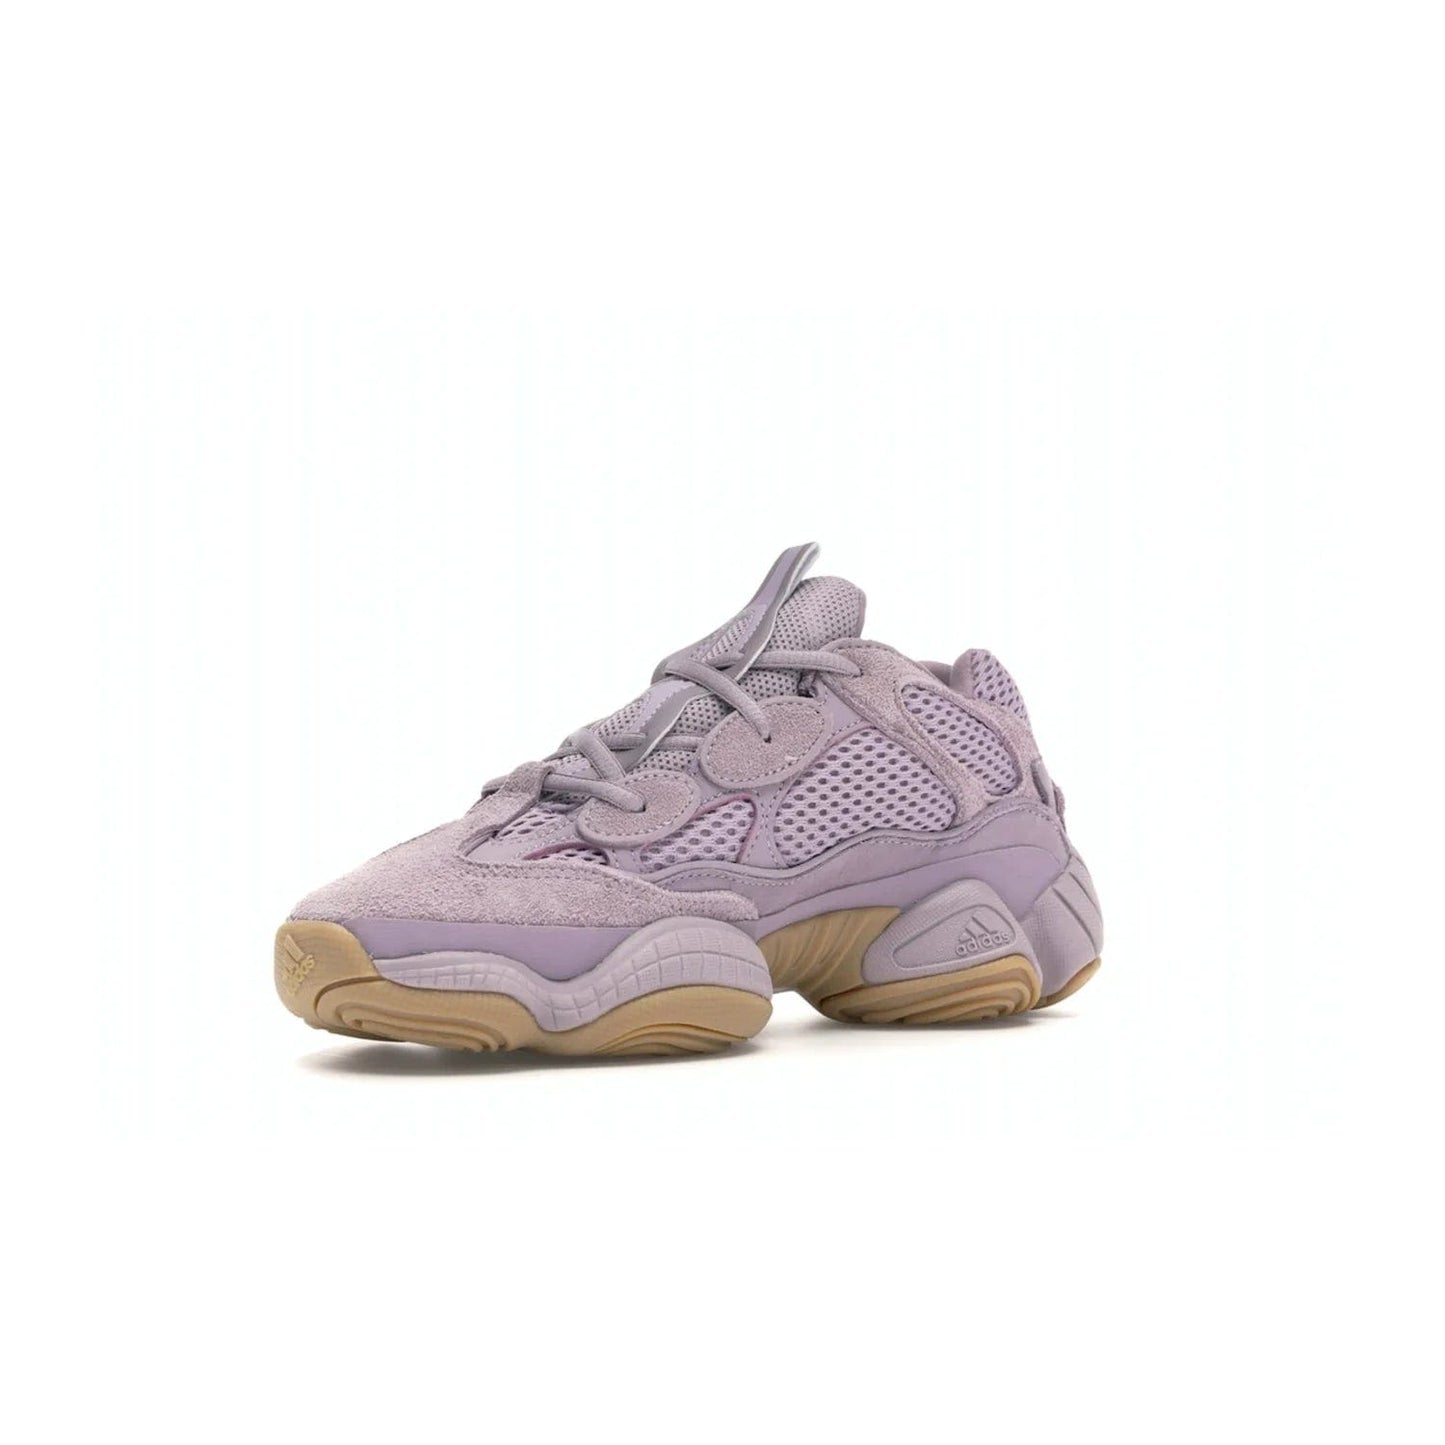 adidas Yeezy 500 Soft Vision - Image 15 - Only at www.BallersClubKickz.com - New adidas Yeezy 500 Soft Vision sneaker featuring a combination of mesh, leather, and suede in a classic Soft Vision colorway. Gum rubber outsole ensures durability and traction. An everyday sneaker that stands out from the crowd.